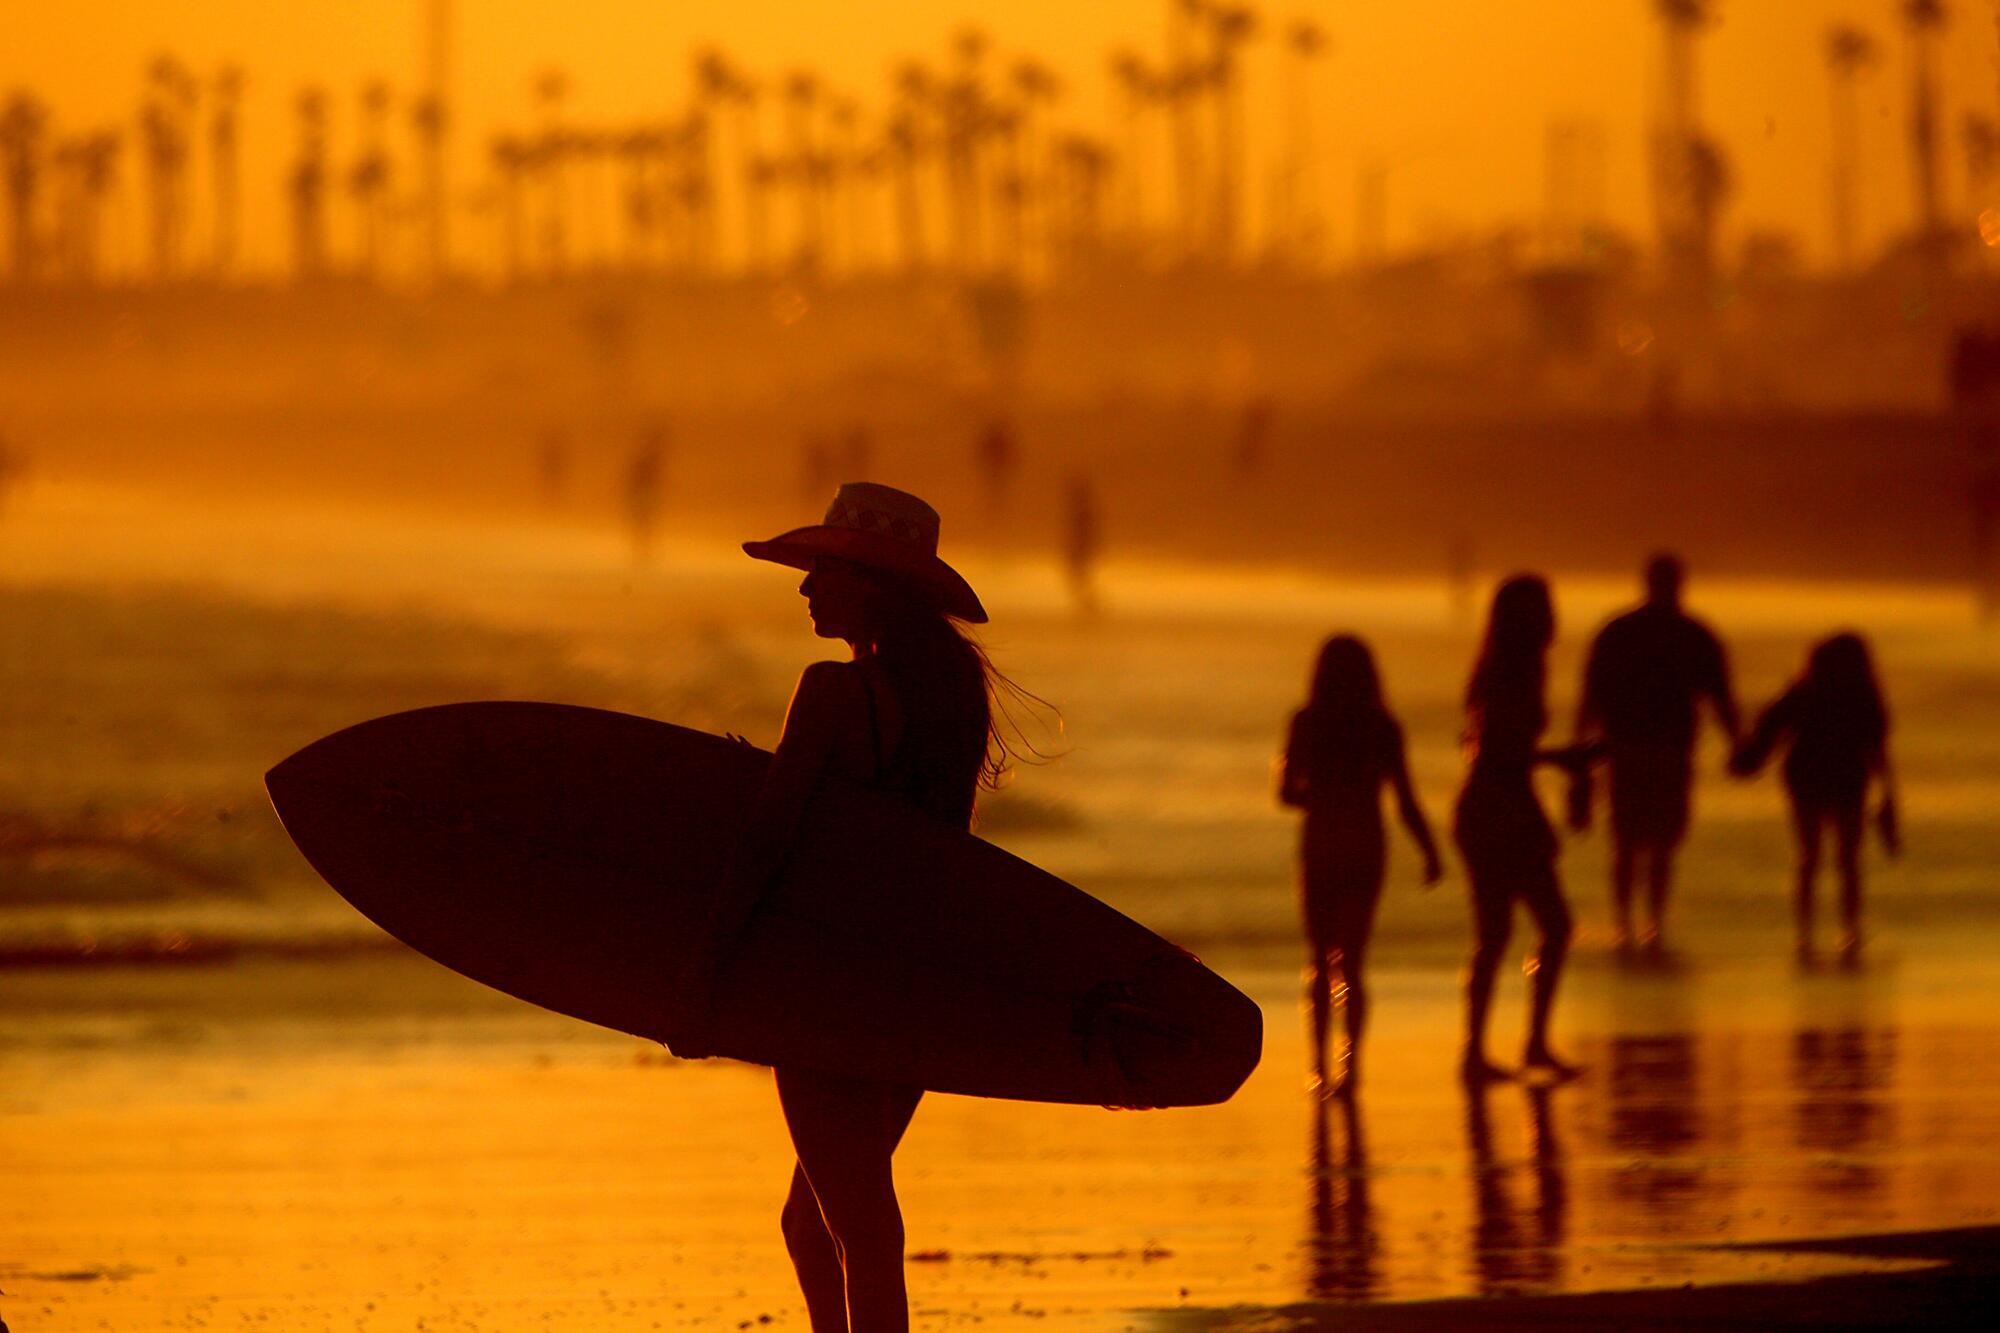 A woman holds a surfboard at a beach that glows orange in the sunset.